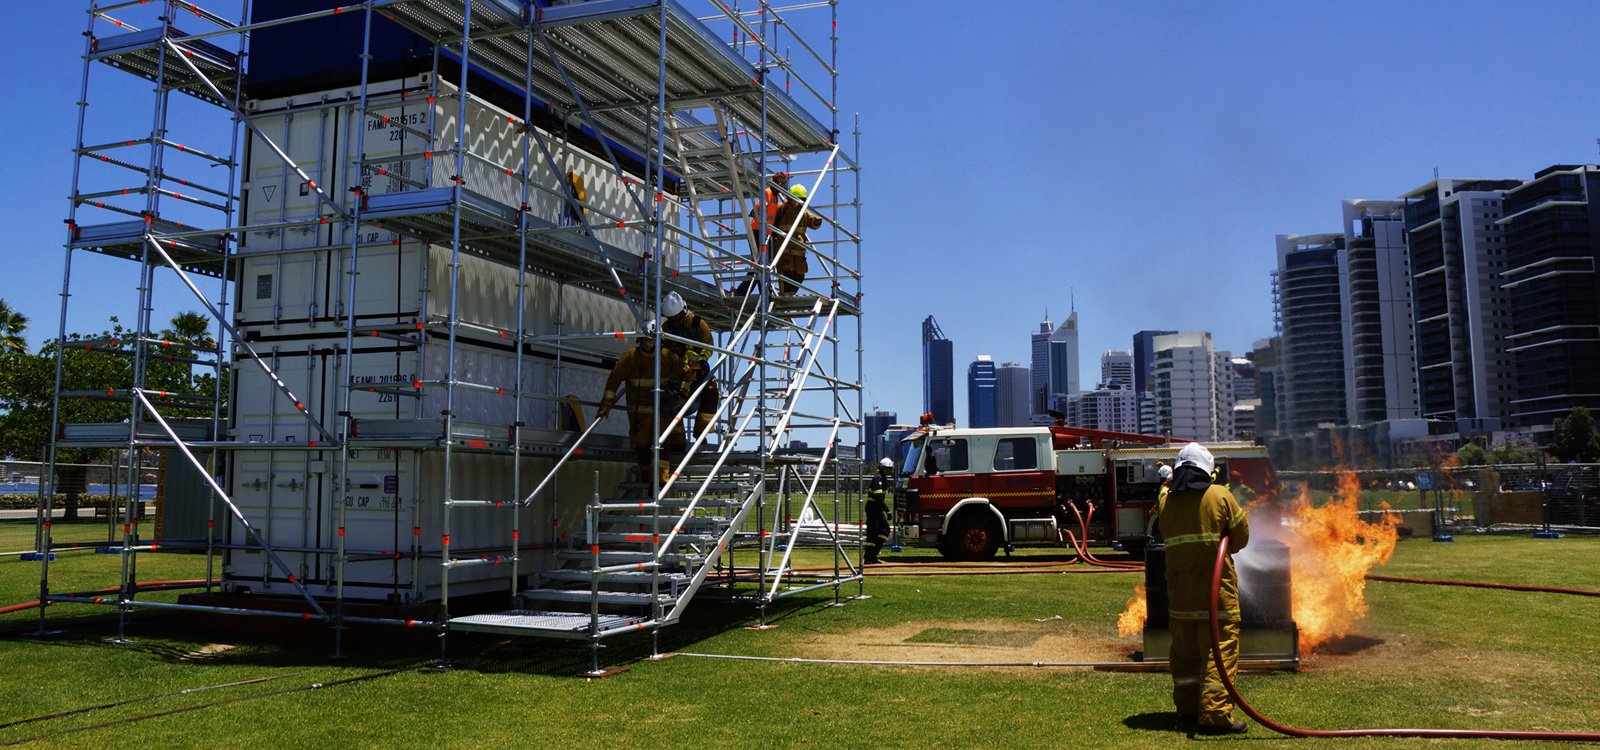 The Mining Emergency Response Competition is held annually in Perth, Australia.